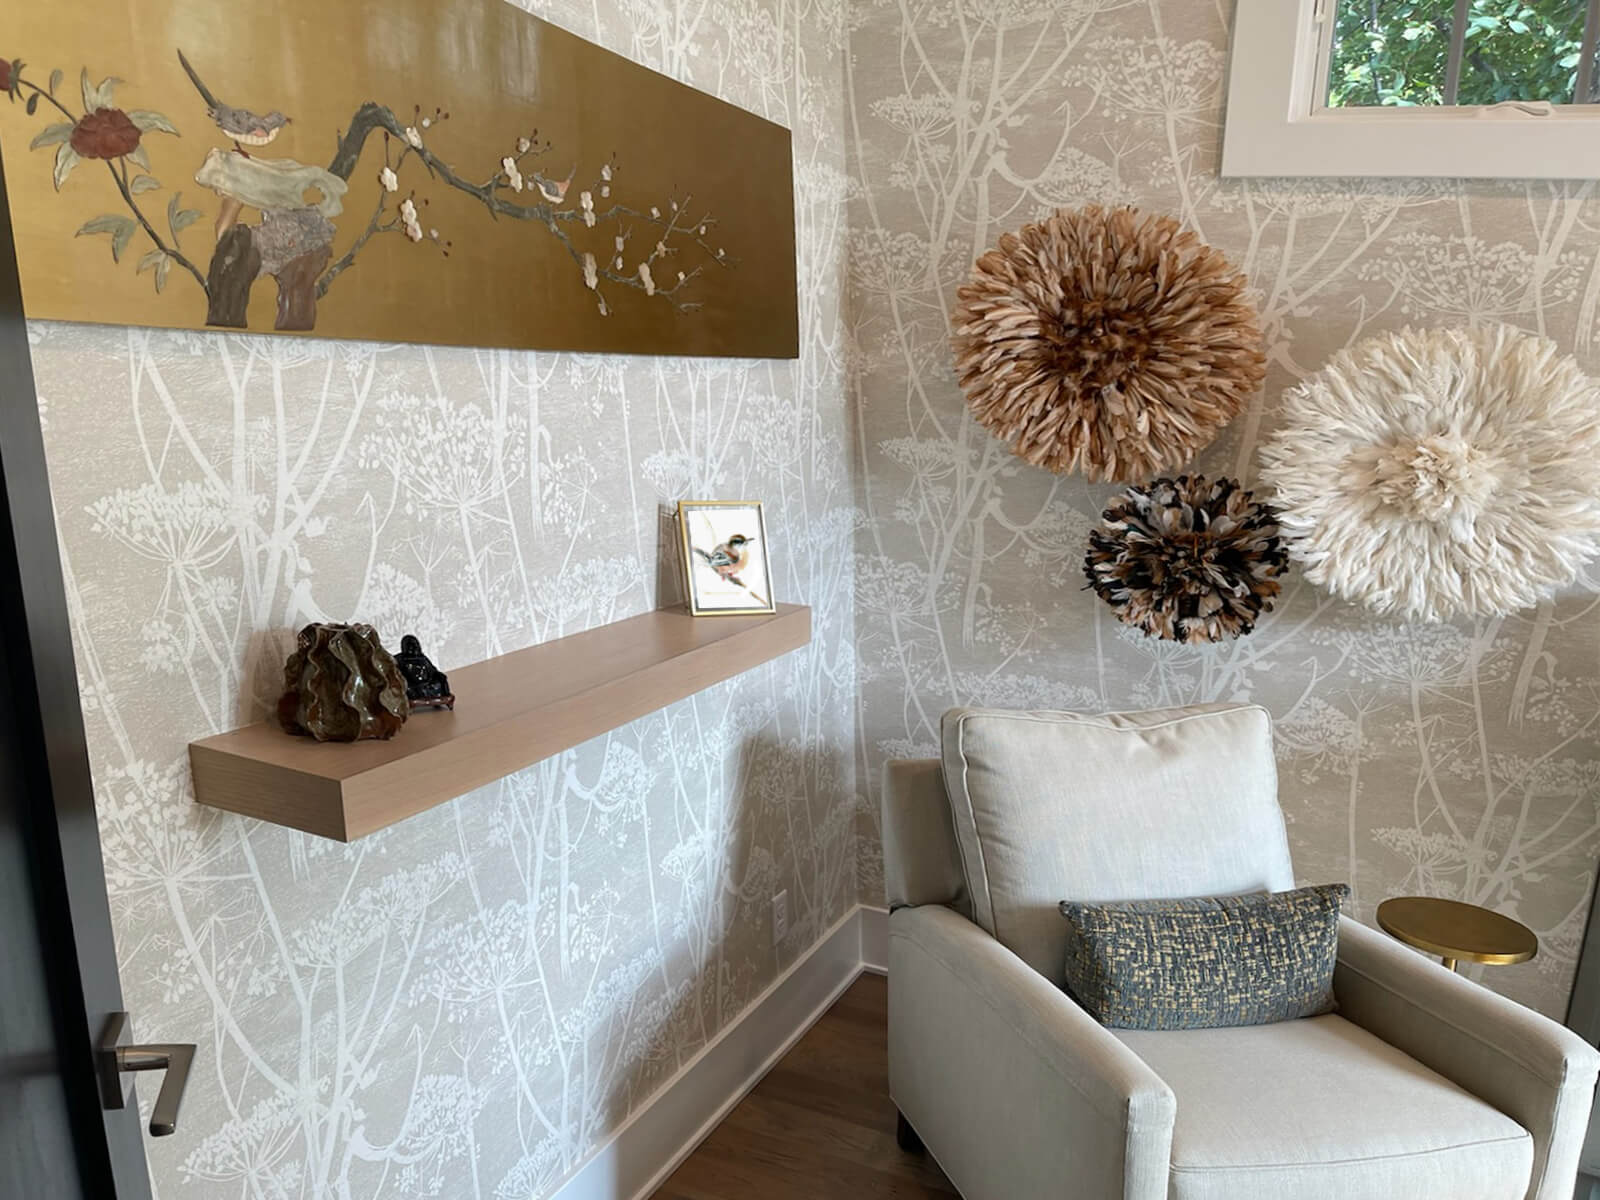 A floating shelf mounted below the wall art next to a lounge chair creates a beautiful sitting area of guests and clients who visit this pretty home office.